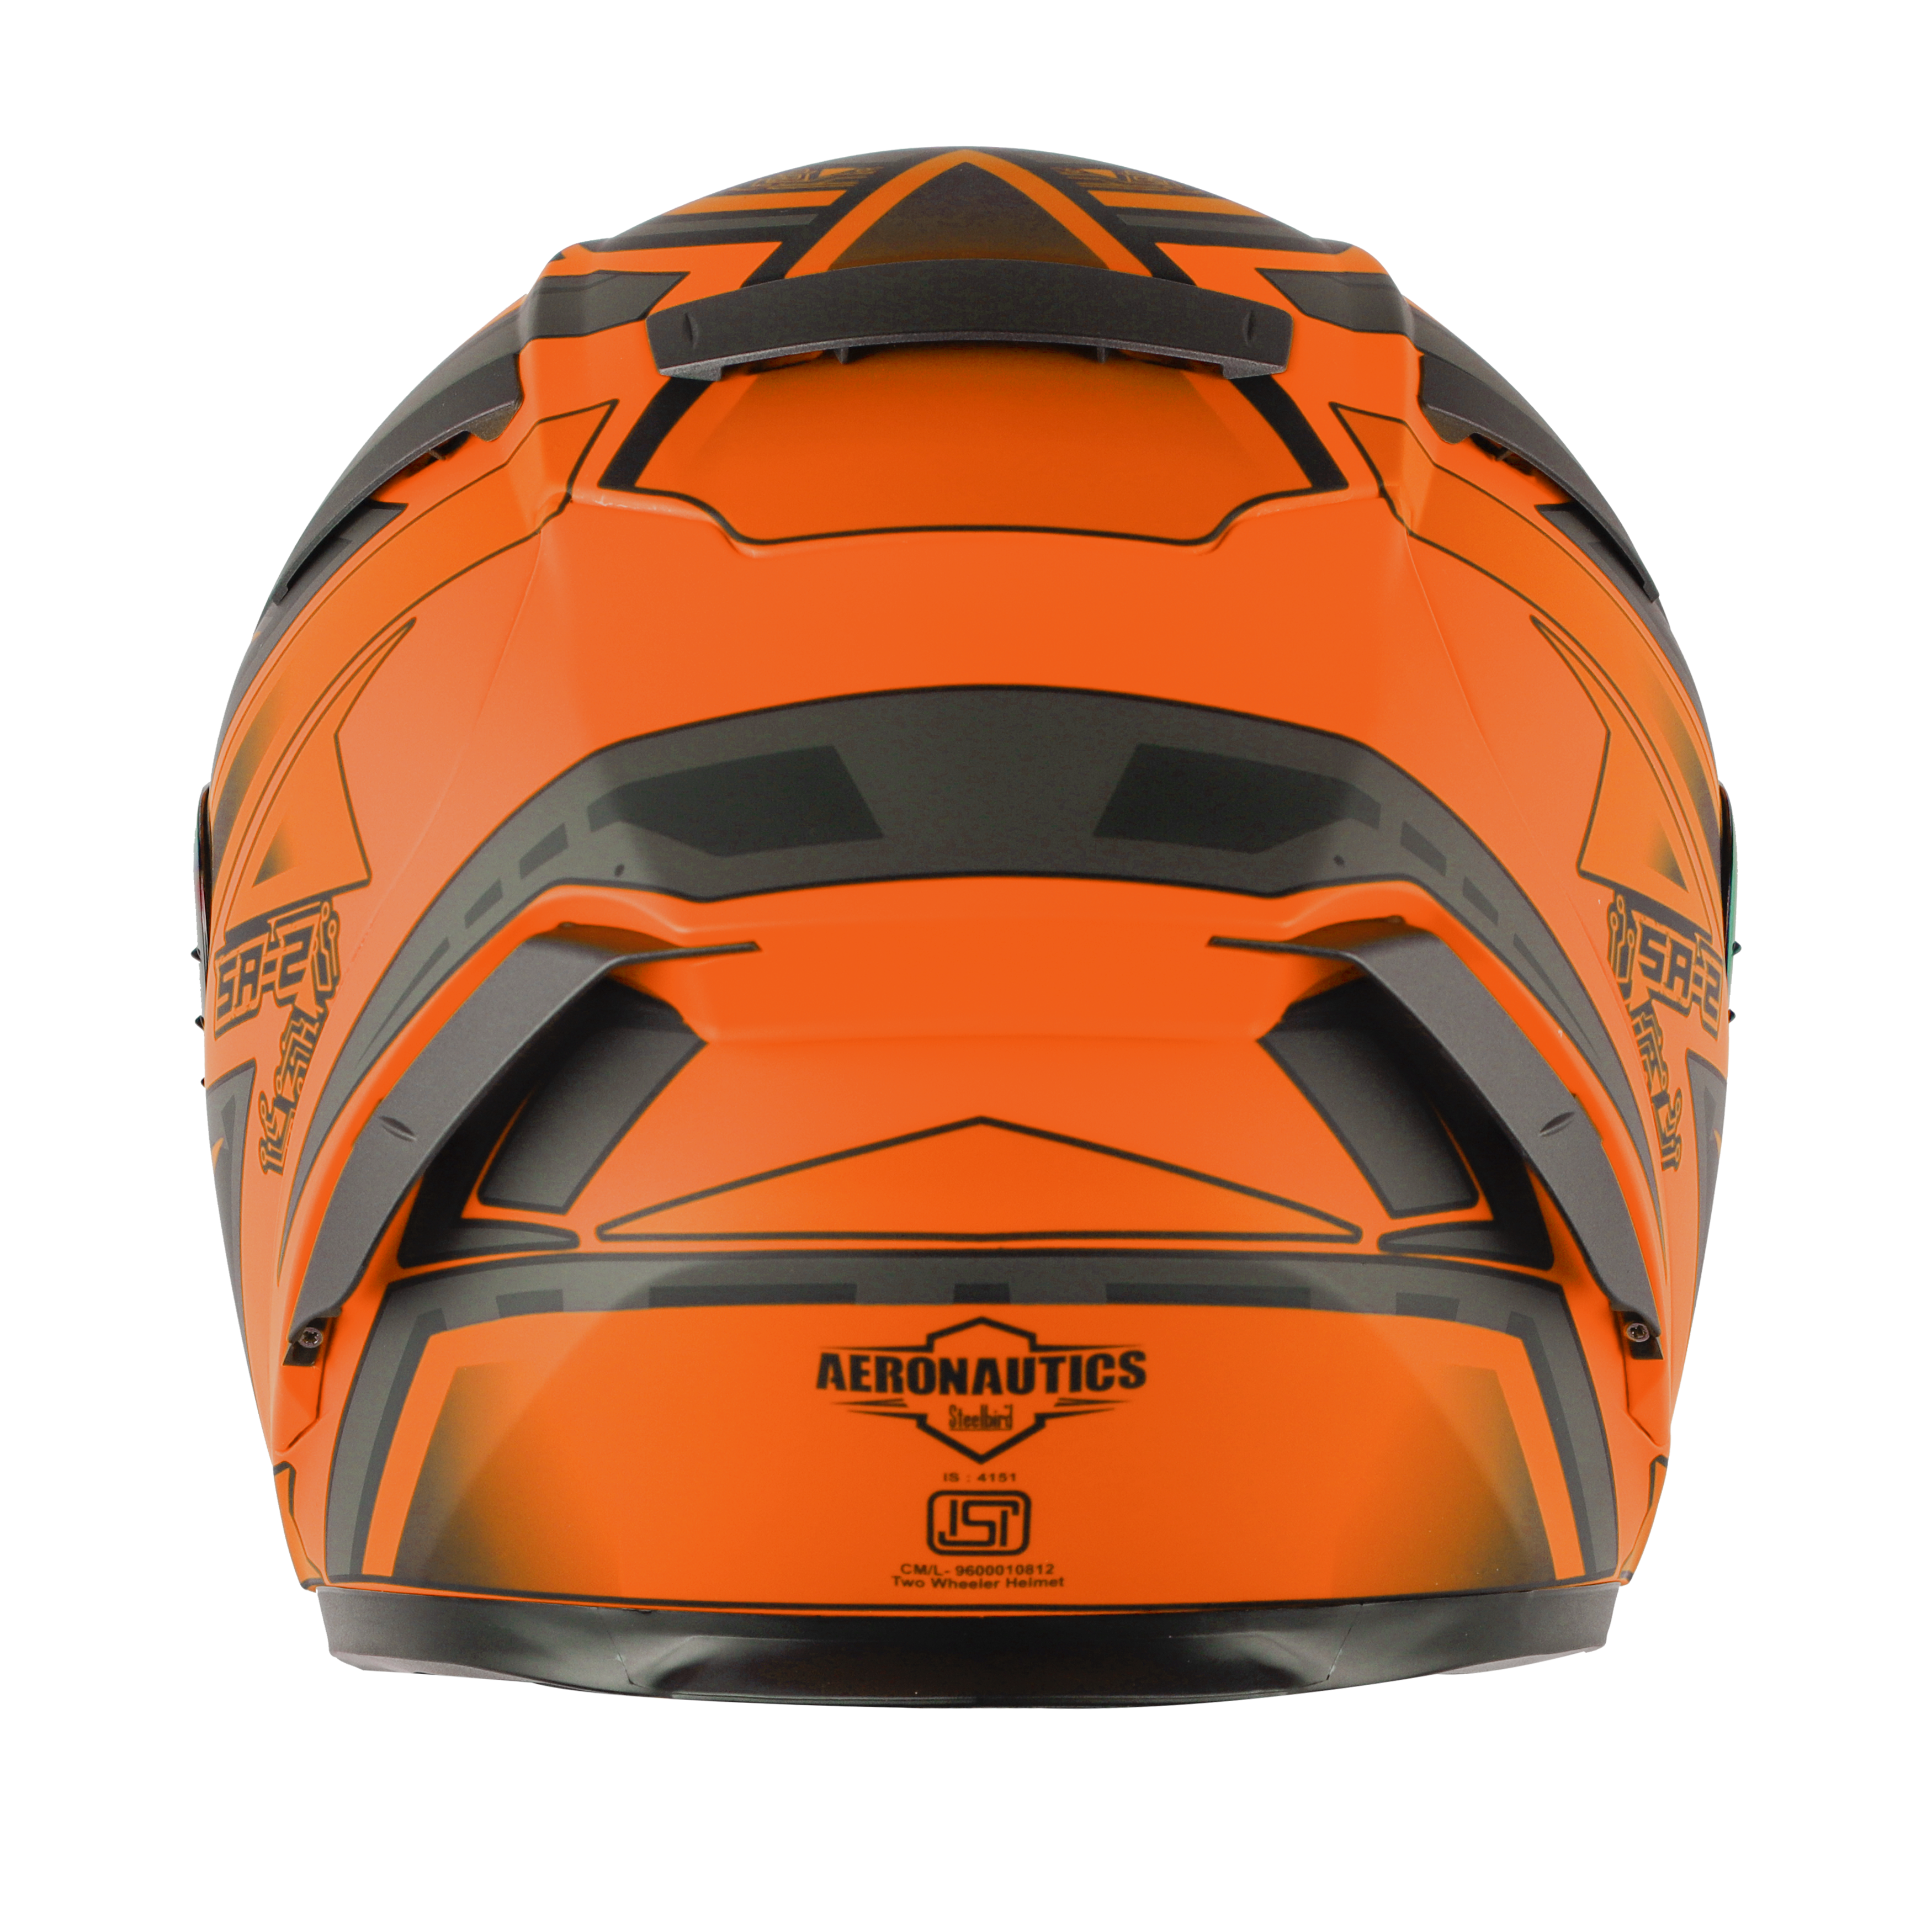 SA-2 ELECTRIC GLOSSY FLUO ORANGE WITH GREY (FITTED WITH CLEAR VISOR EXTRA GOLD CHROME VISOR FREE WITH ANTI-FOG SHIELD HOLDER)